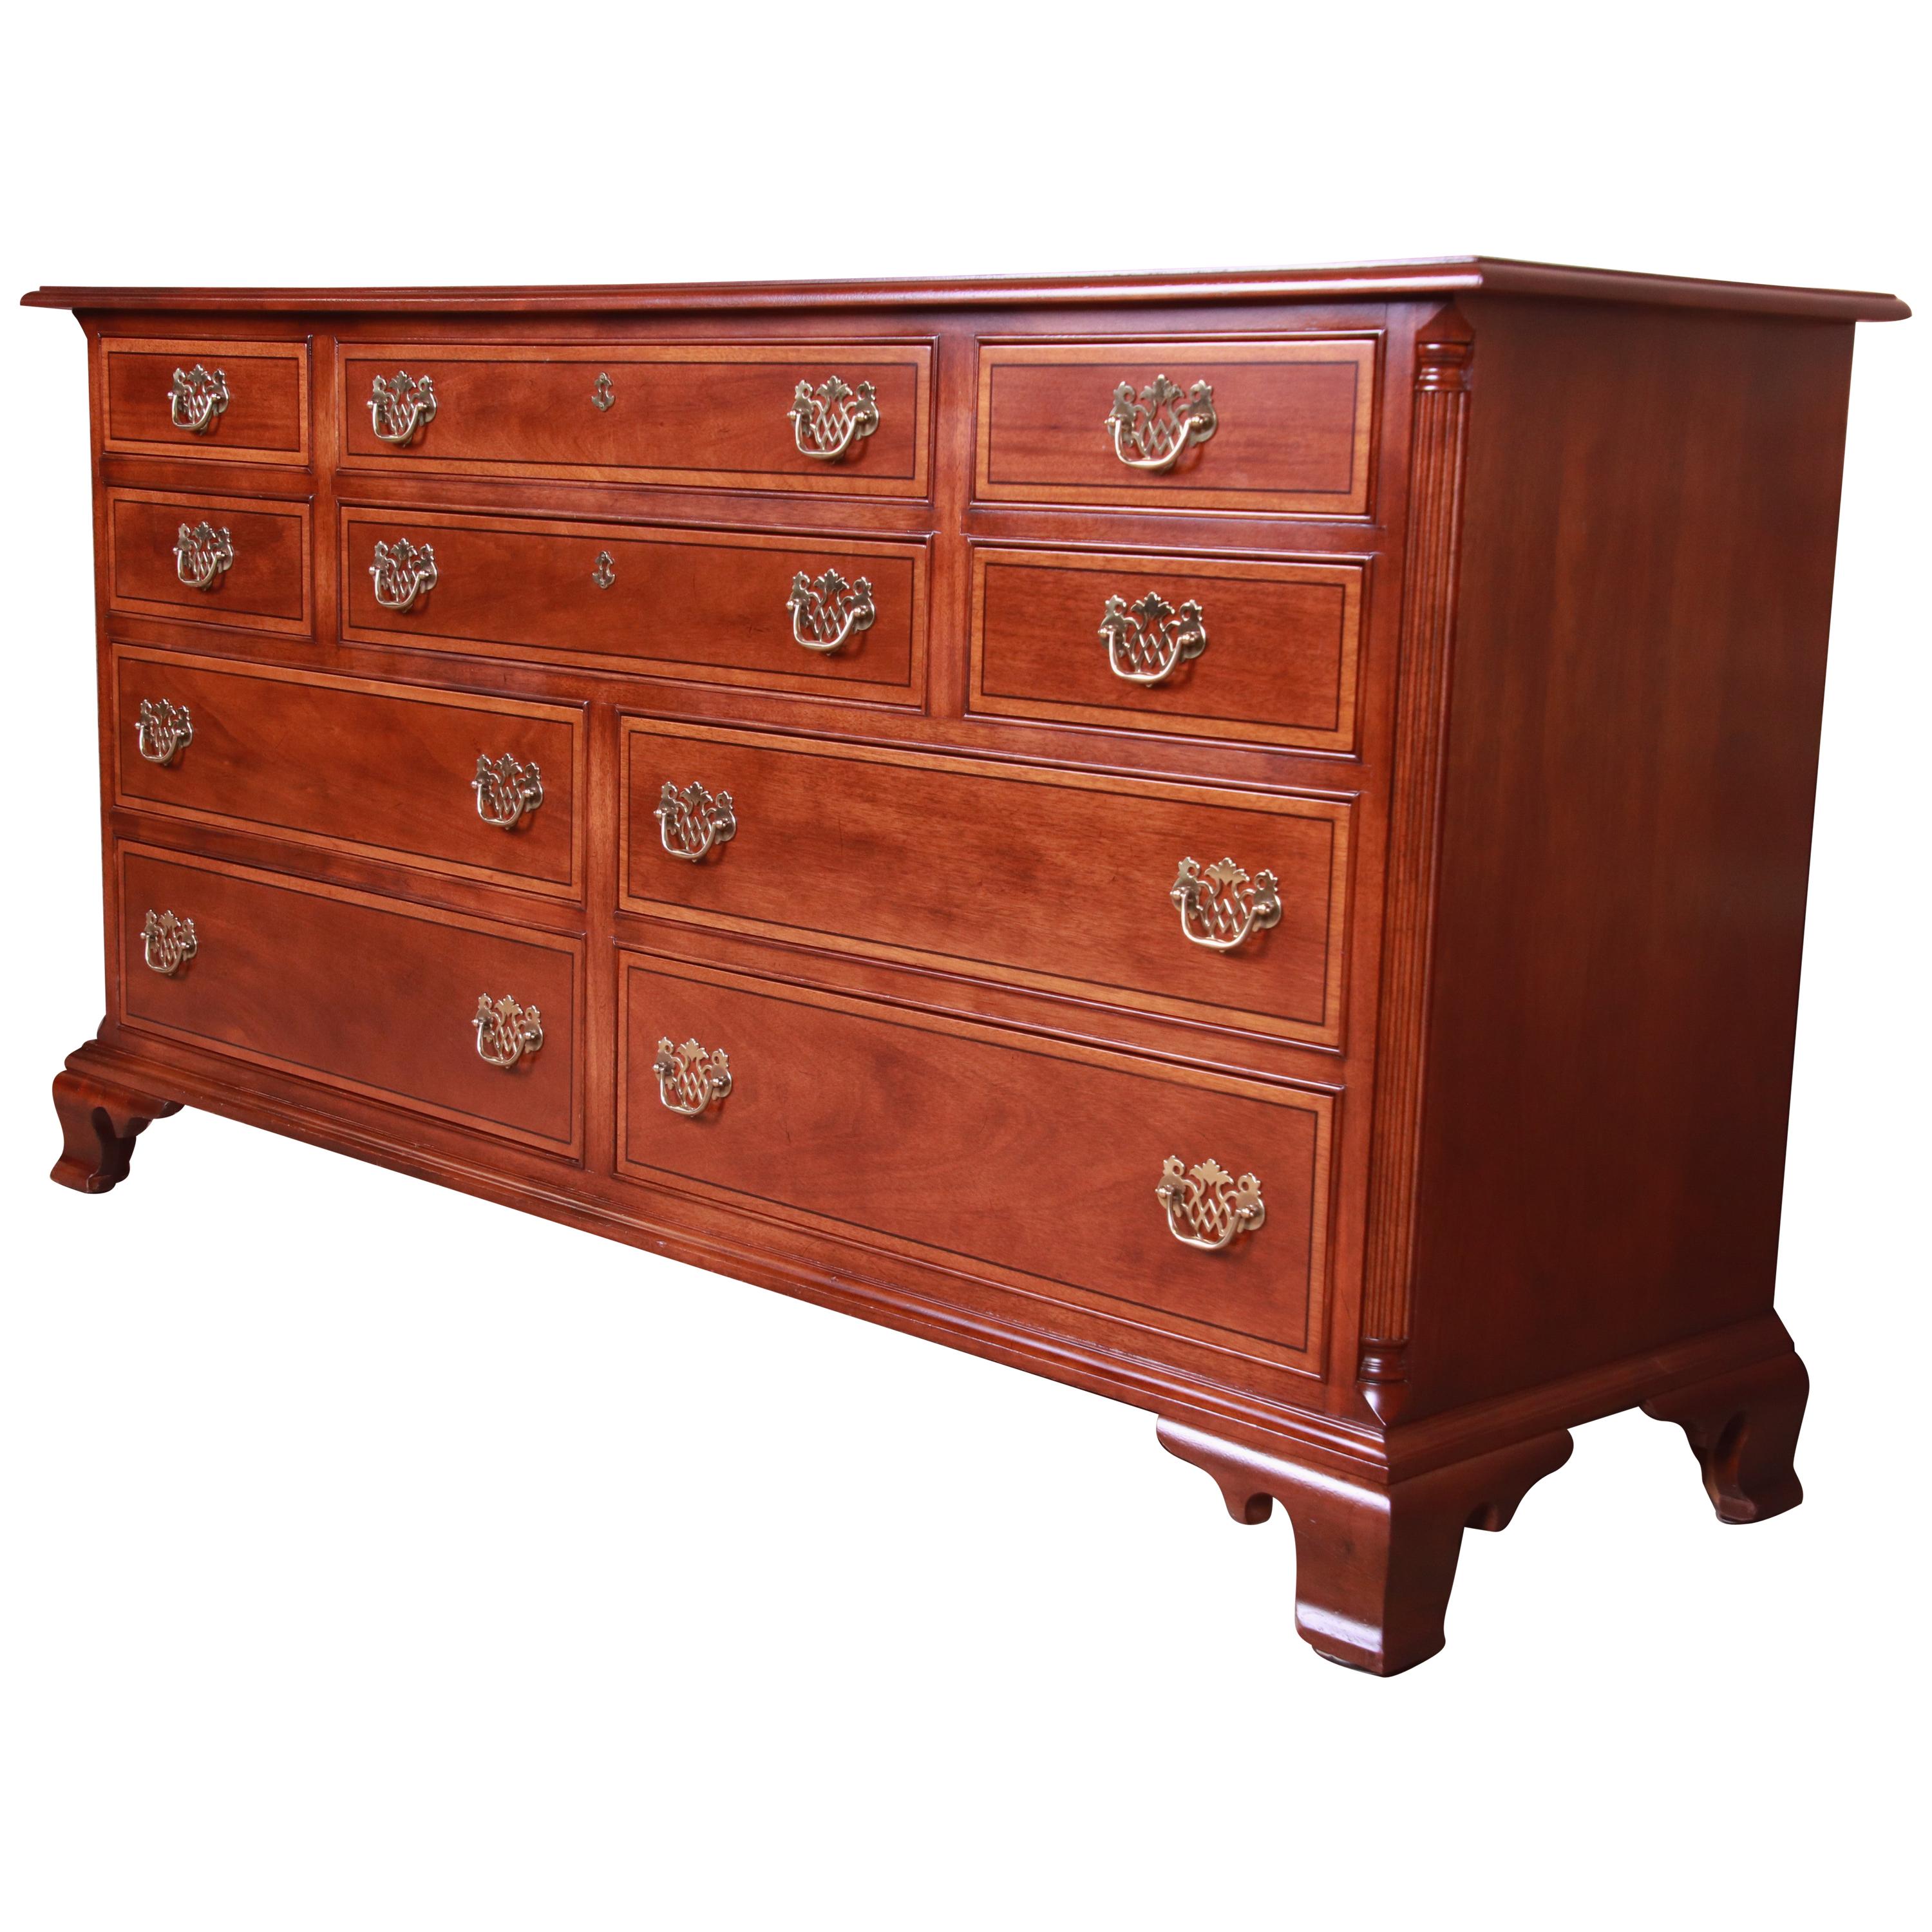 Stickley Chippendale Mahogany Ten-Drawer Dresser or Credenza, Newly Refinished